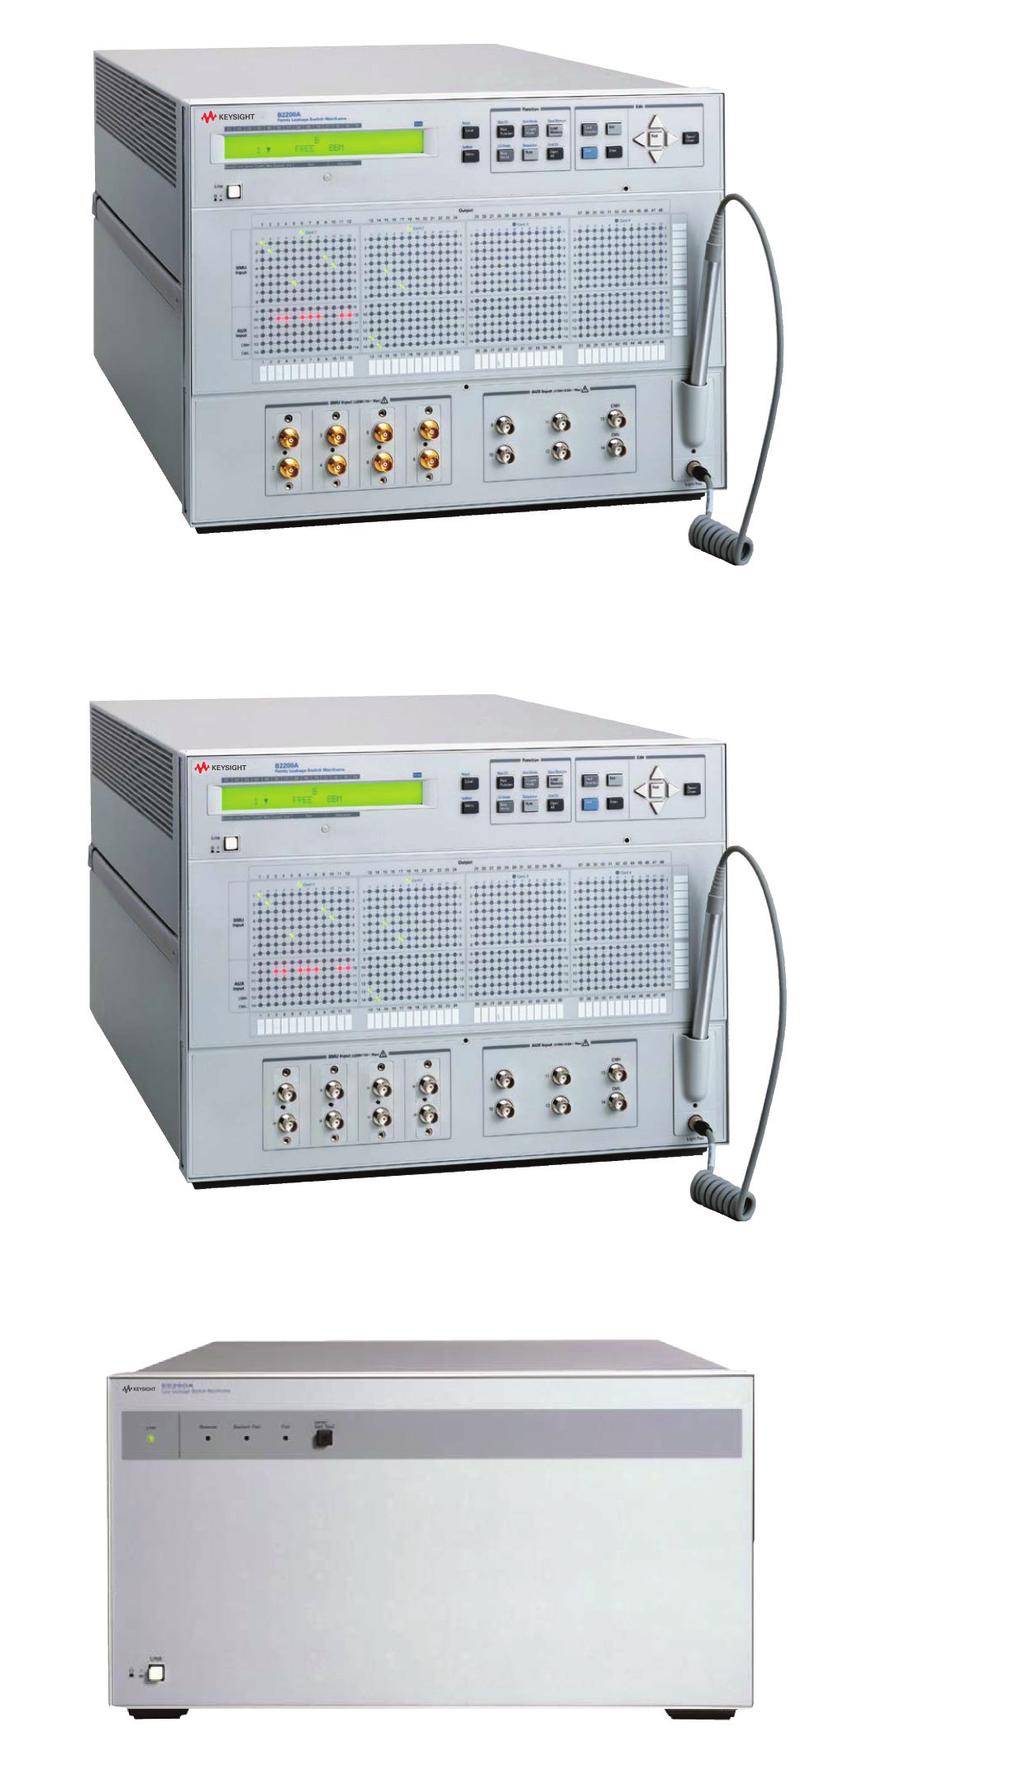 06 Keysight E5250A/B2201A/B2200A Low Leakage Switching Matrices - Brochure Switching Solutions that provide CV-IV Measurement Performance without